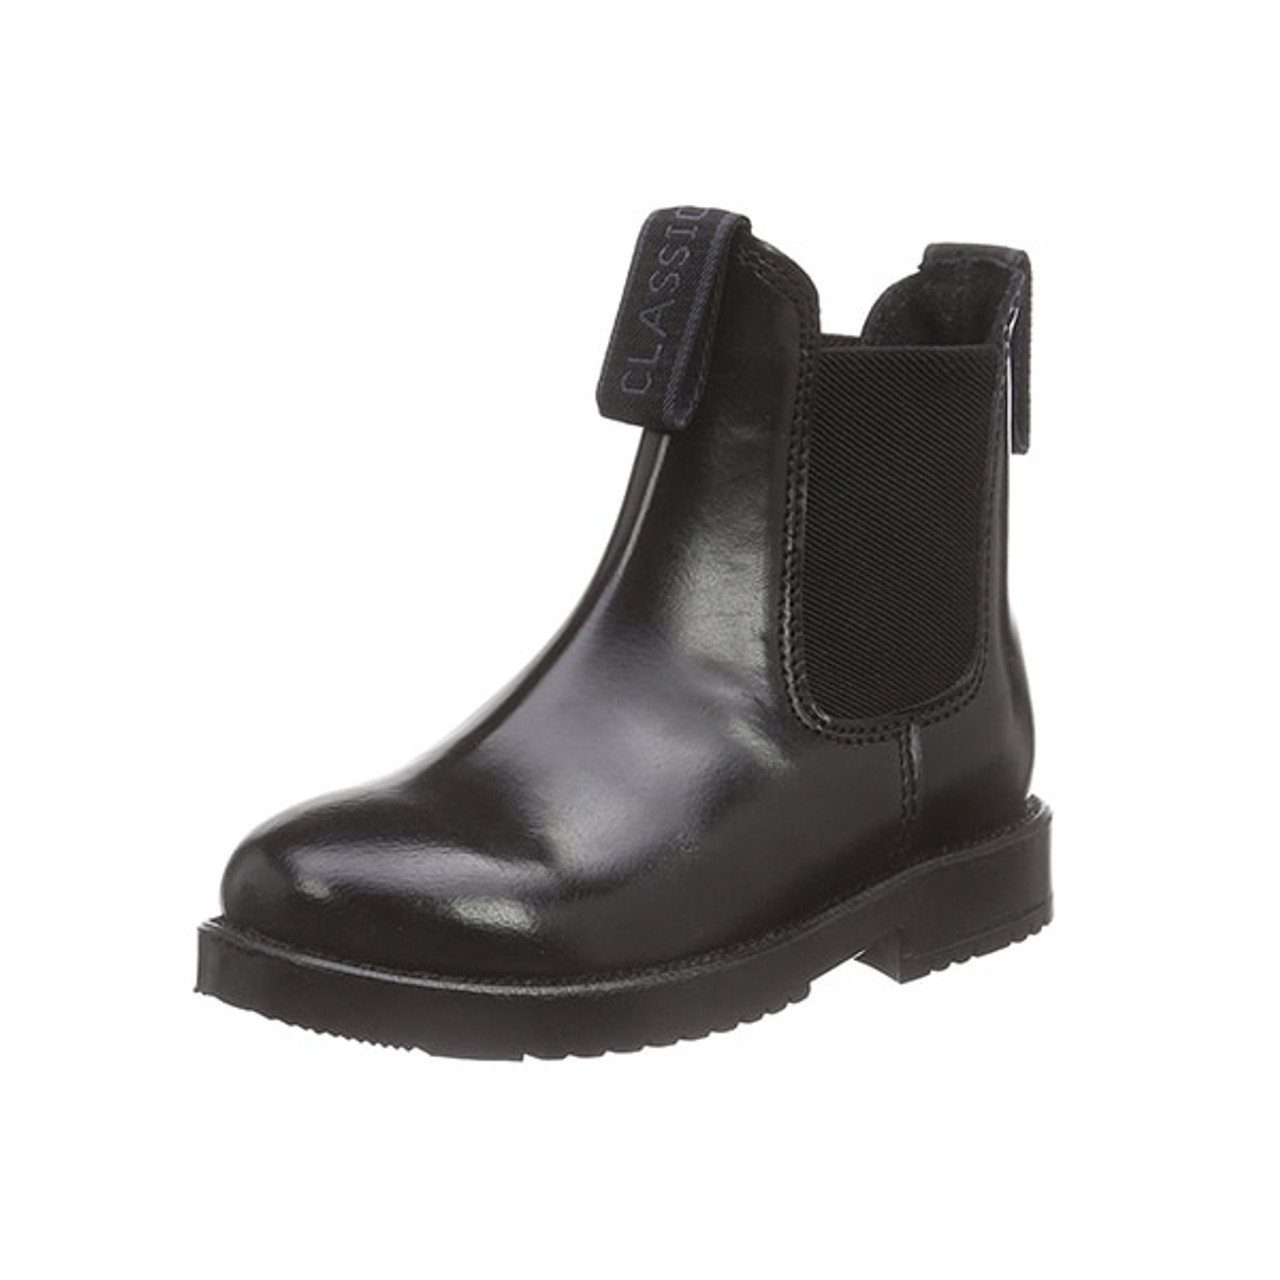 riding boots sale clearance